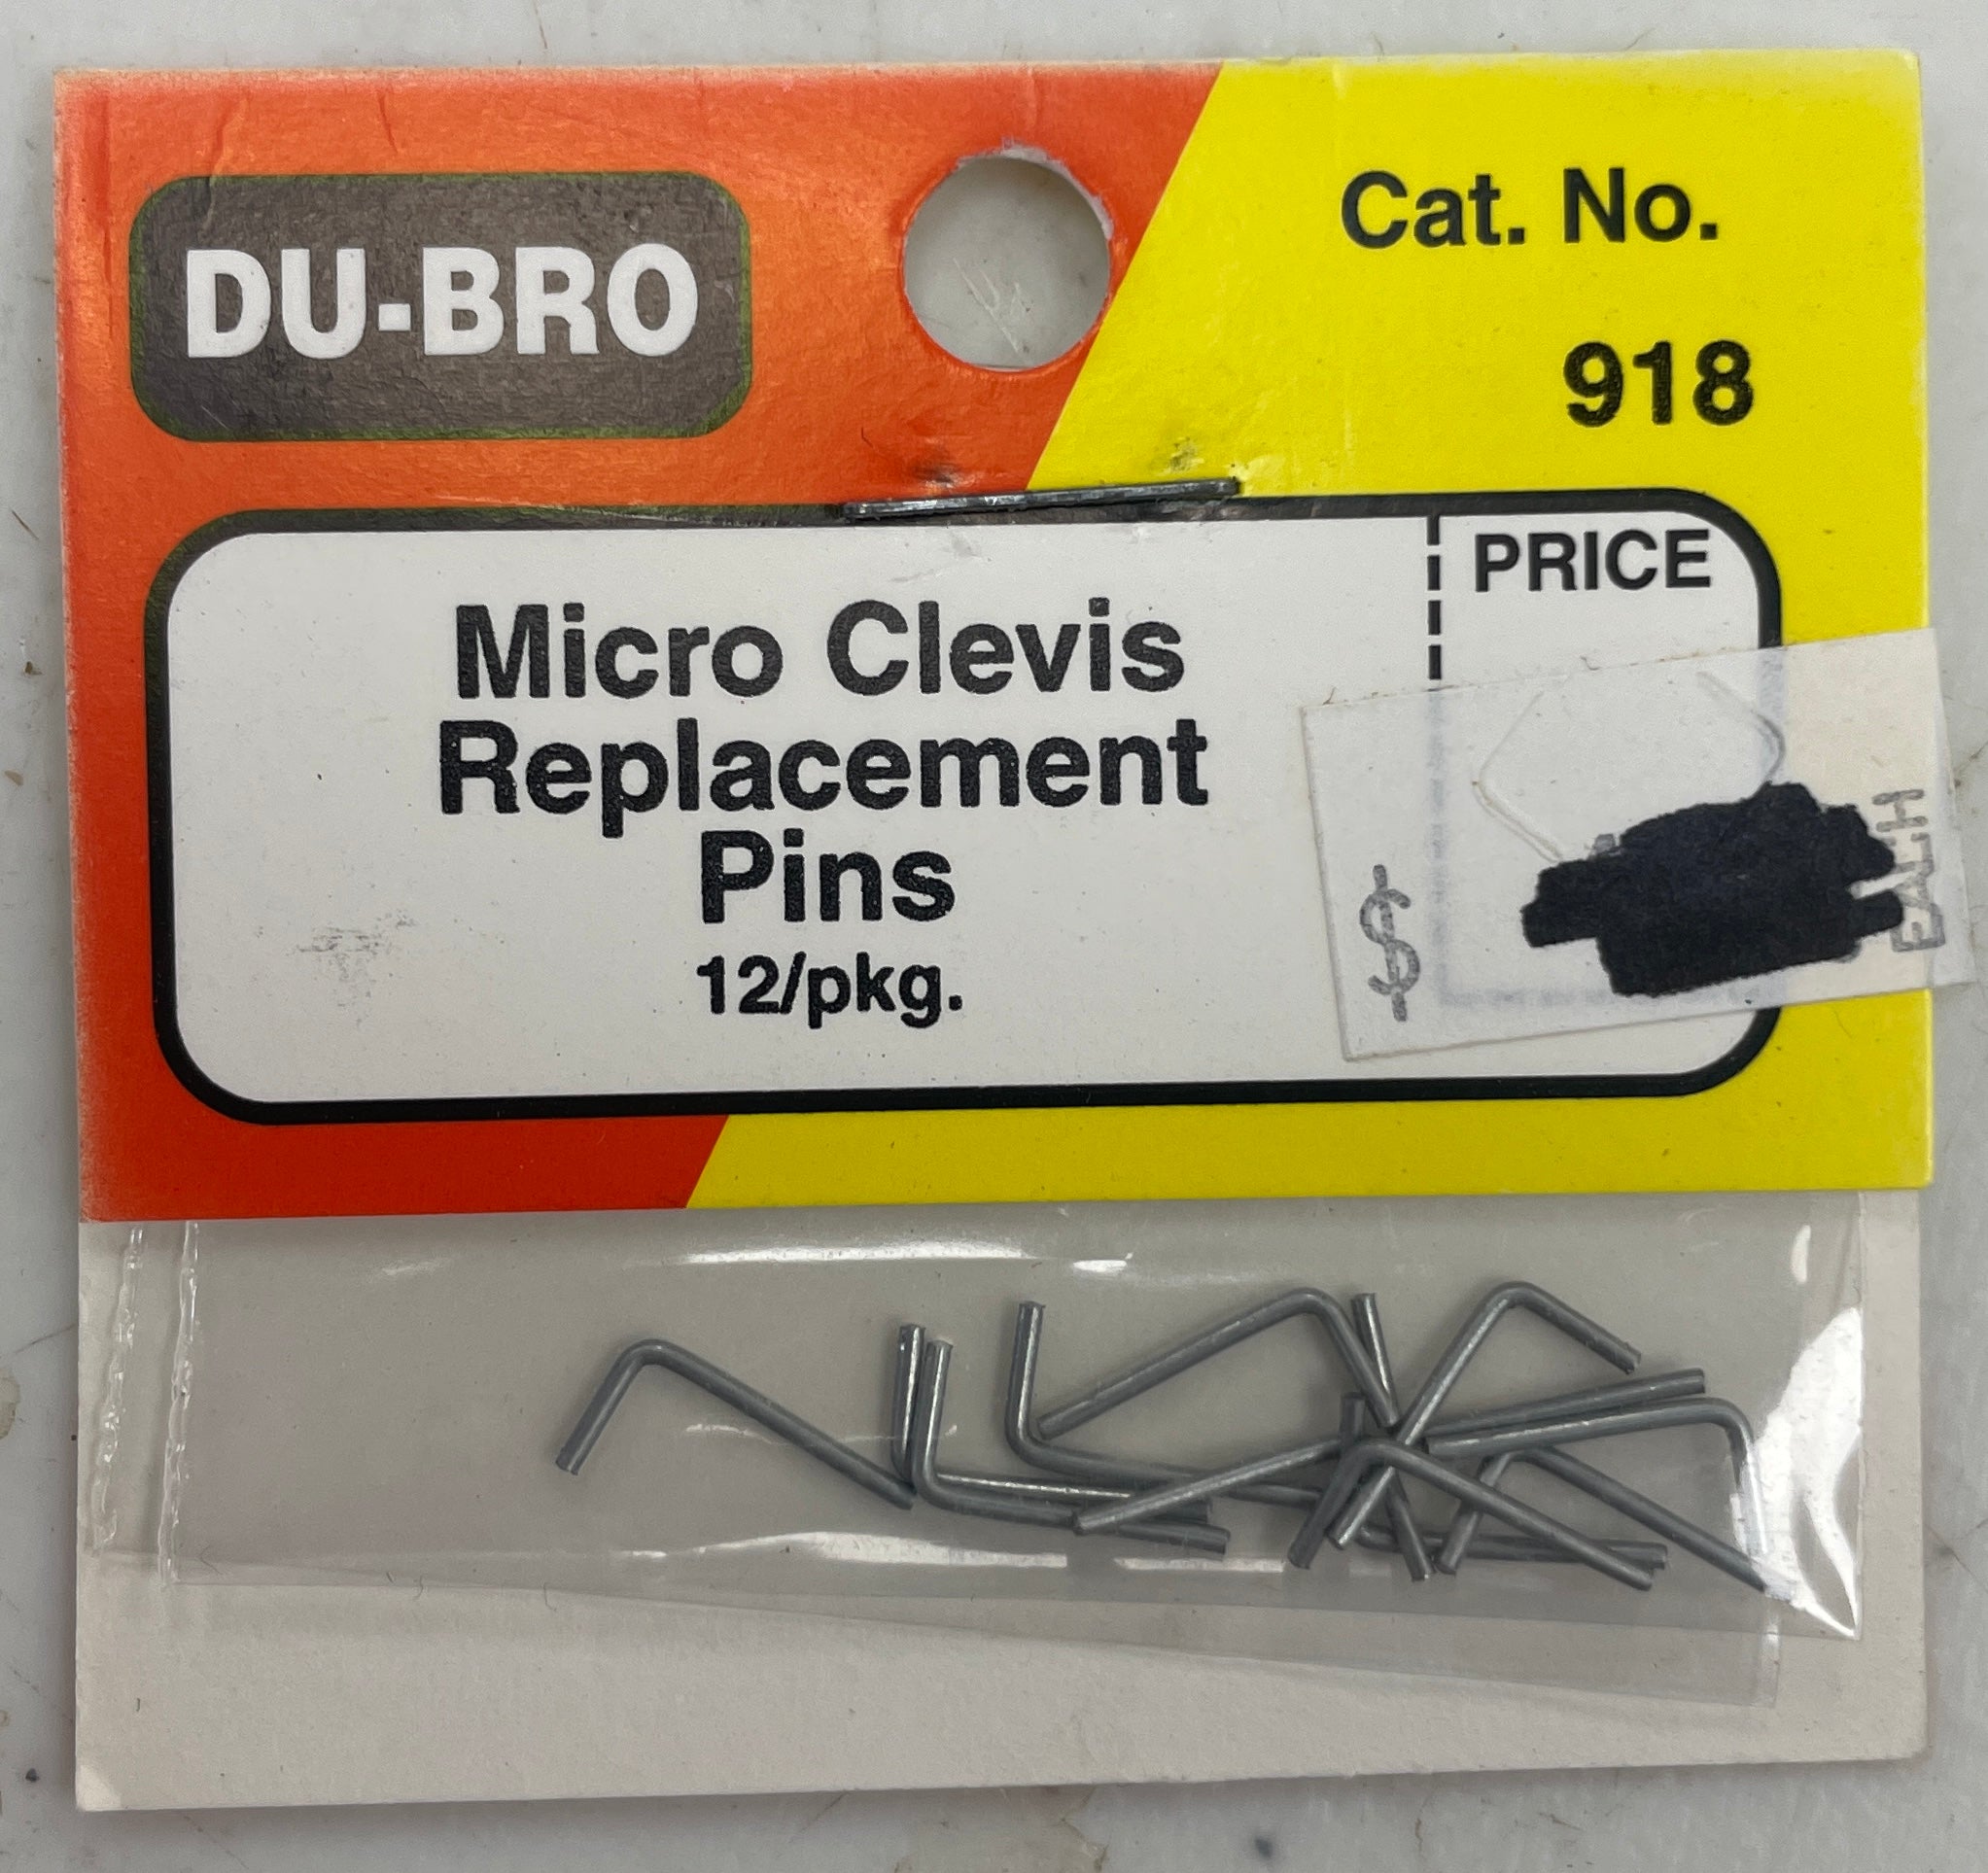 DuBro Micro Clevis Replacement Pins Du-Bro R/C Airplane *Clearance